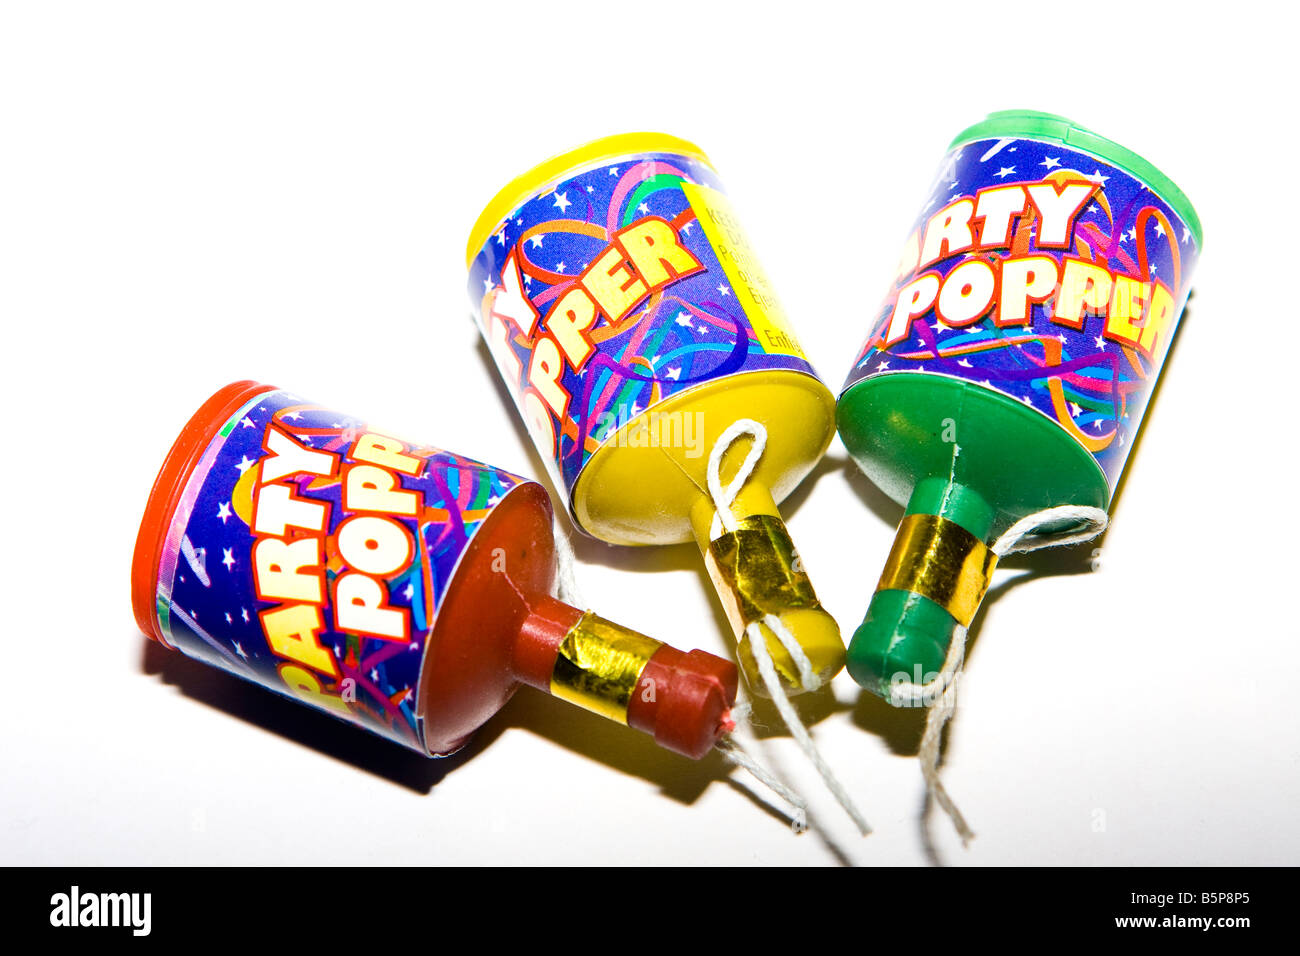 Three Party poppers Stock Photo